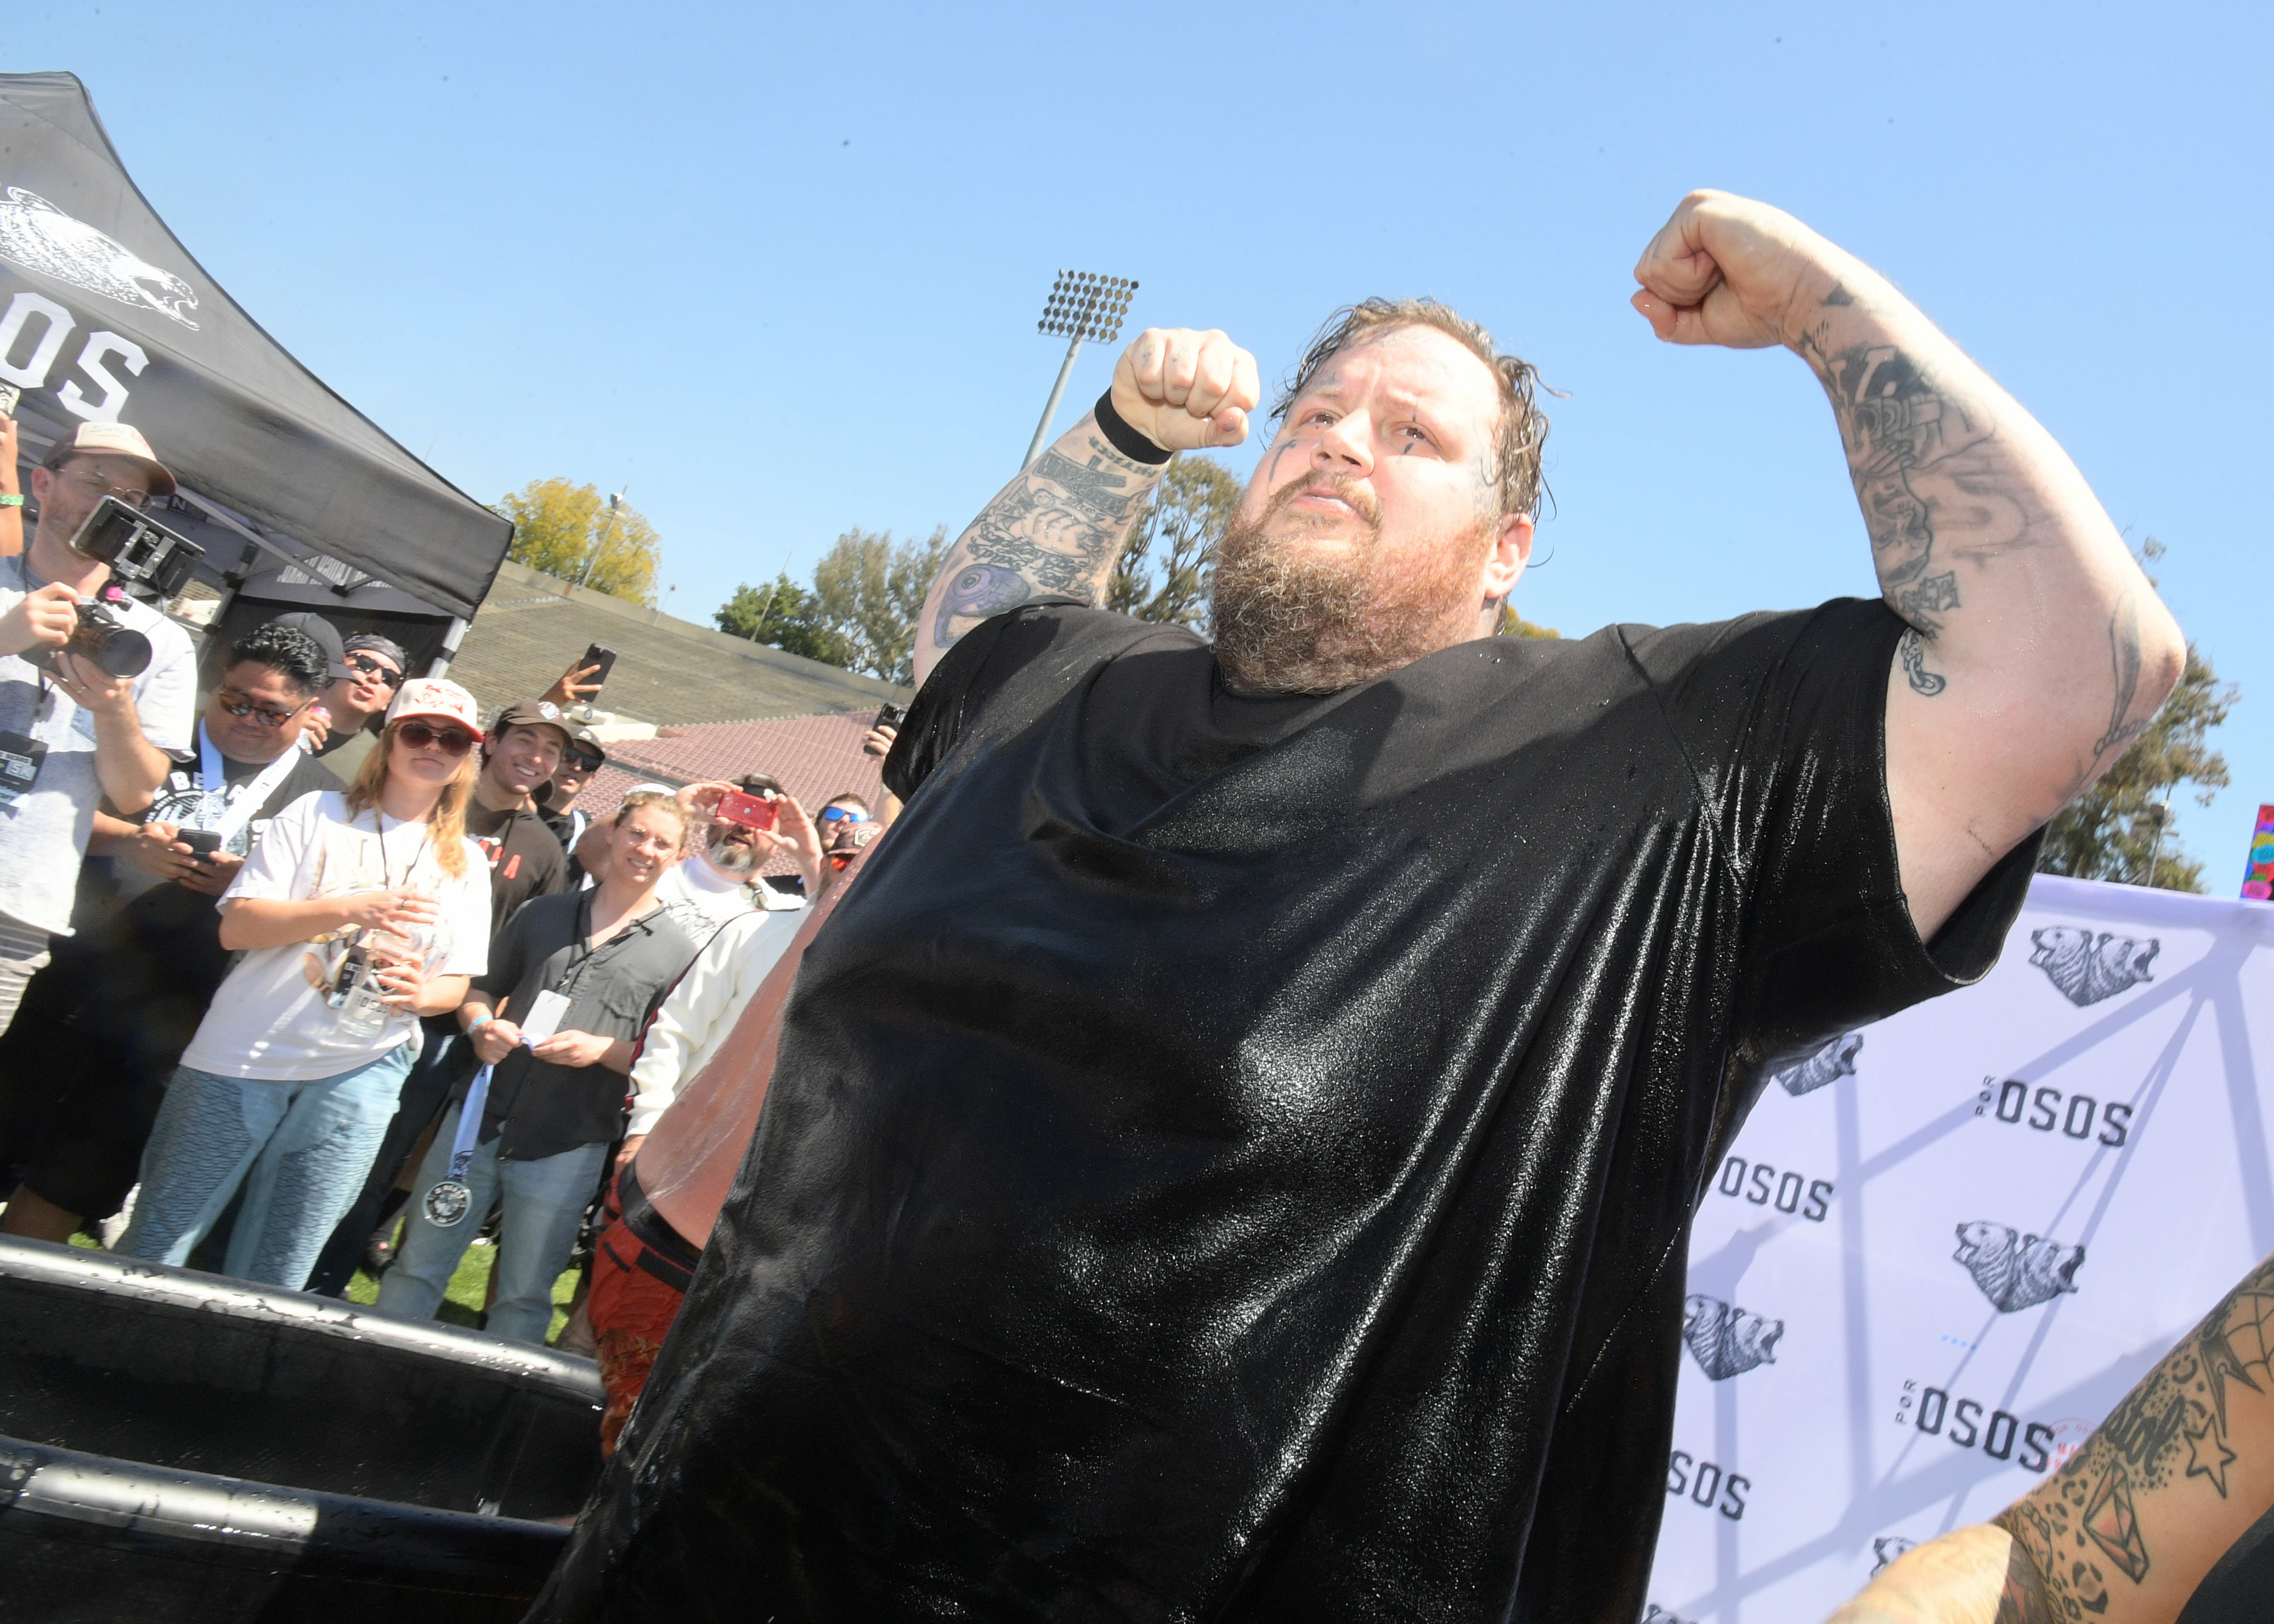 Jelly Roll Reveals He’s Training to Run a Half Marathon Amid 70-Lb. Weight Loss Journey